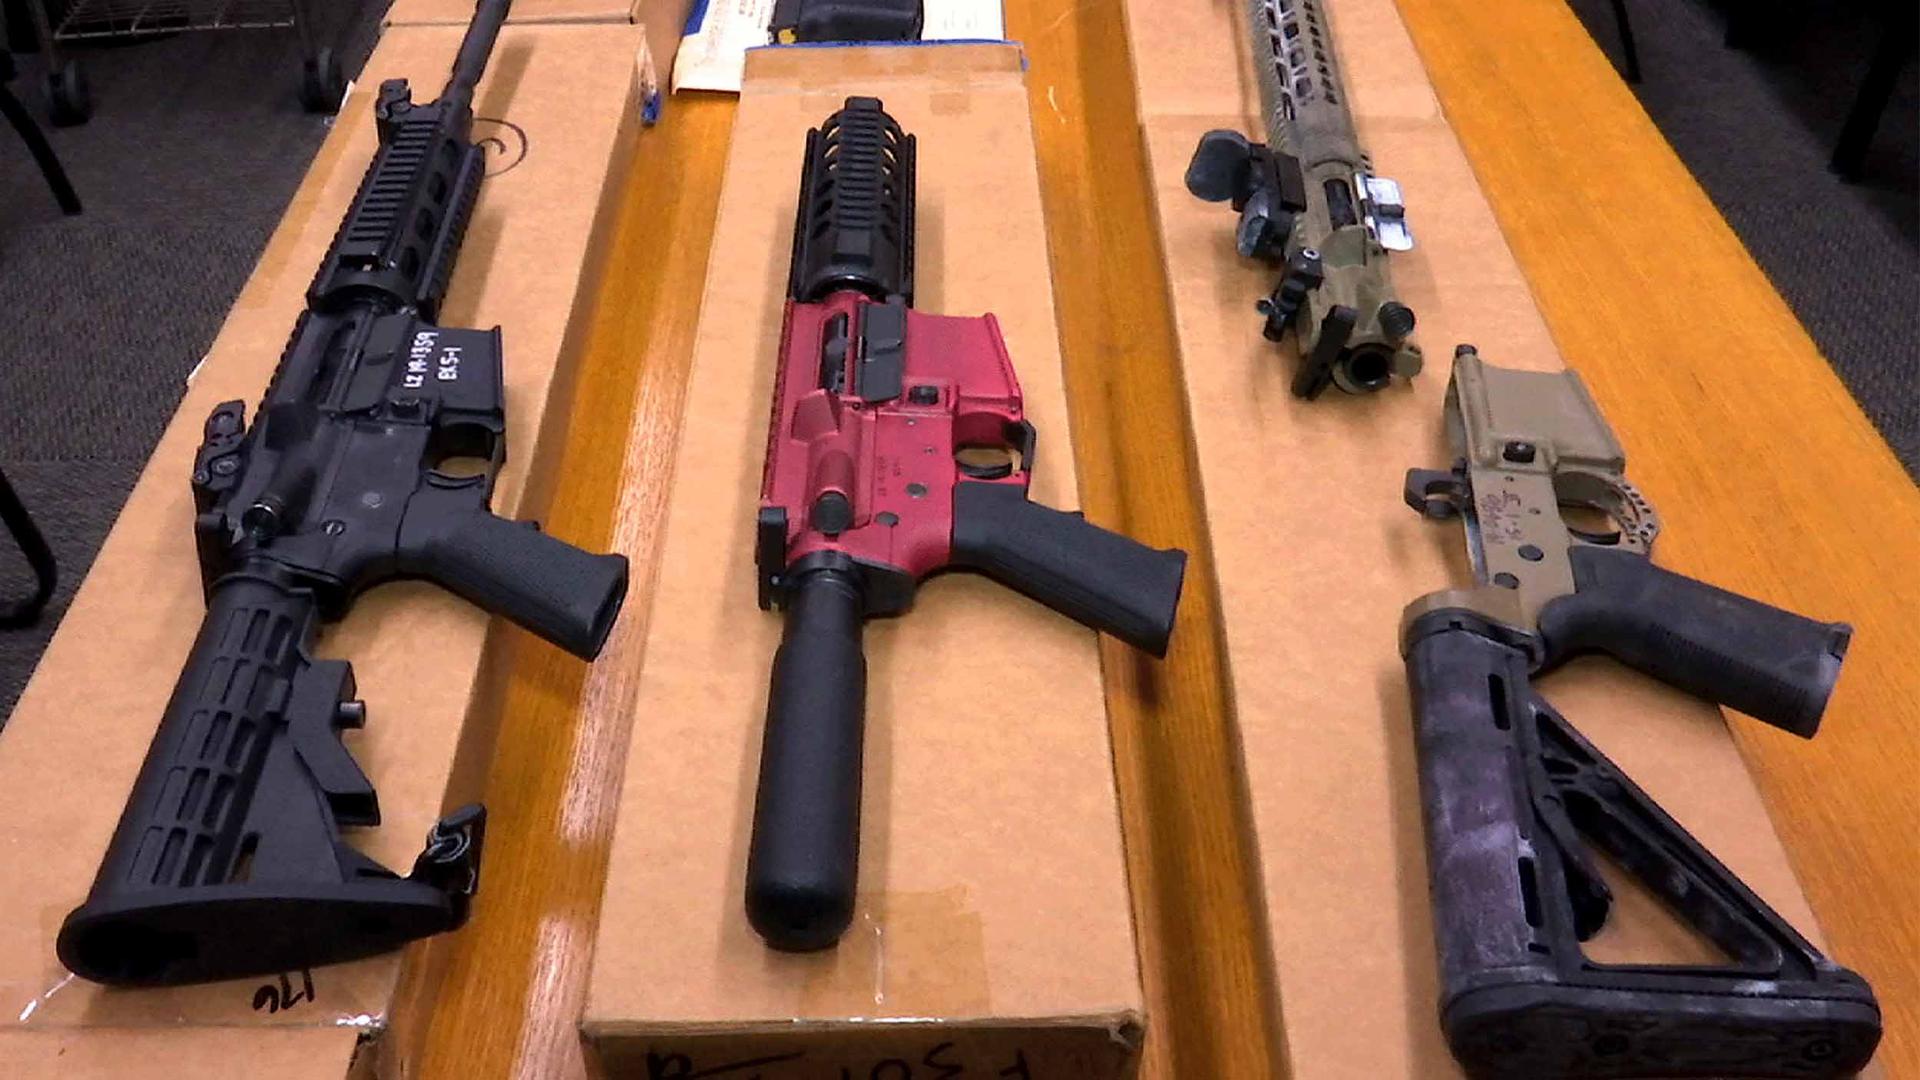 A display of a variety of guns on a table made from unauthorized parts